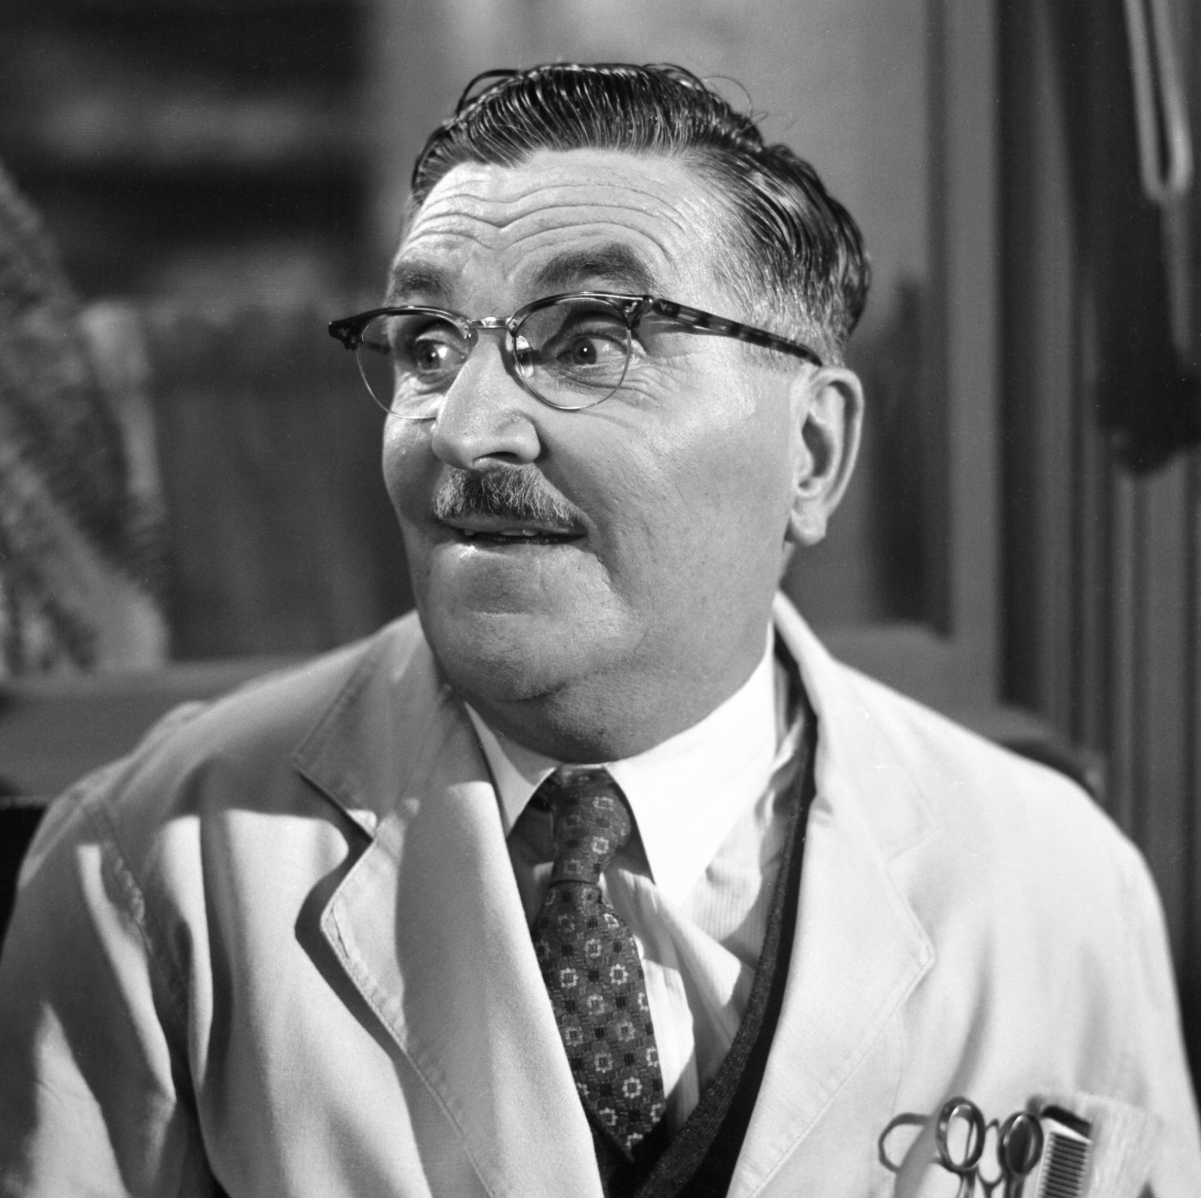 Actor Howard McNear as Floyd the Barber on 'The Andy Griffith Show'